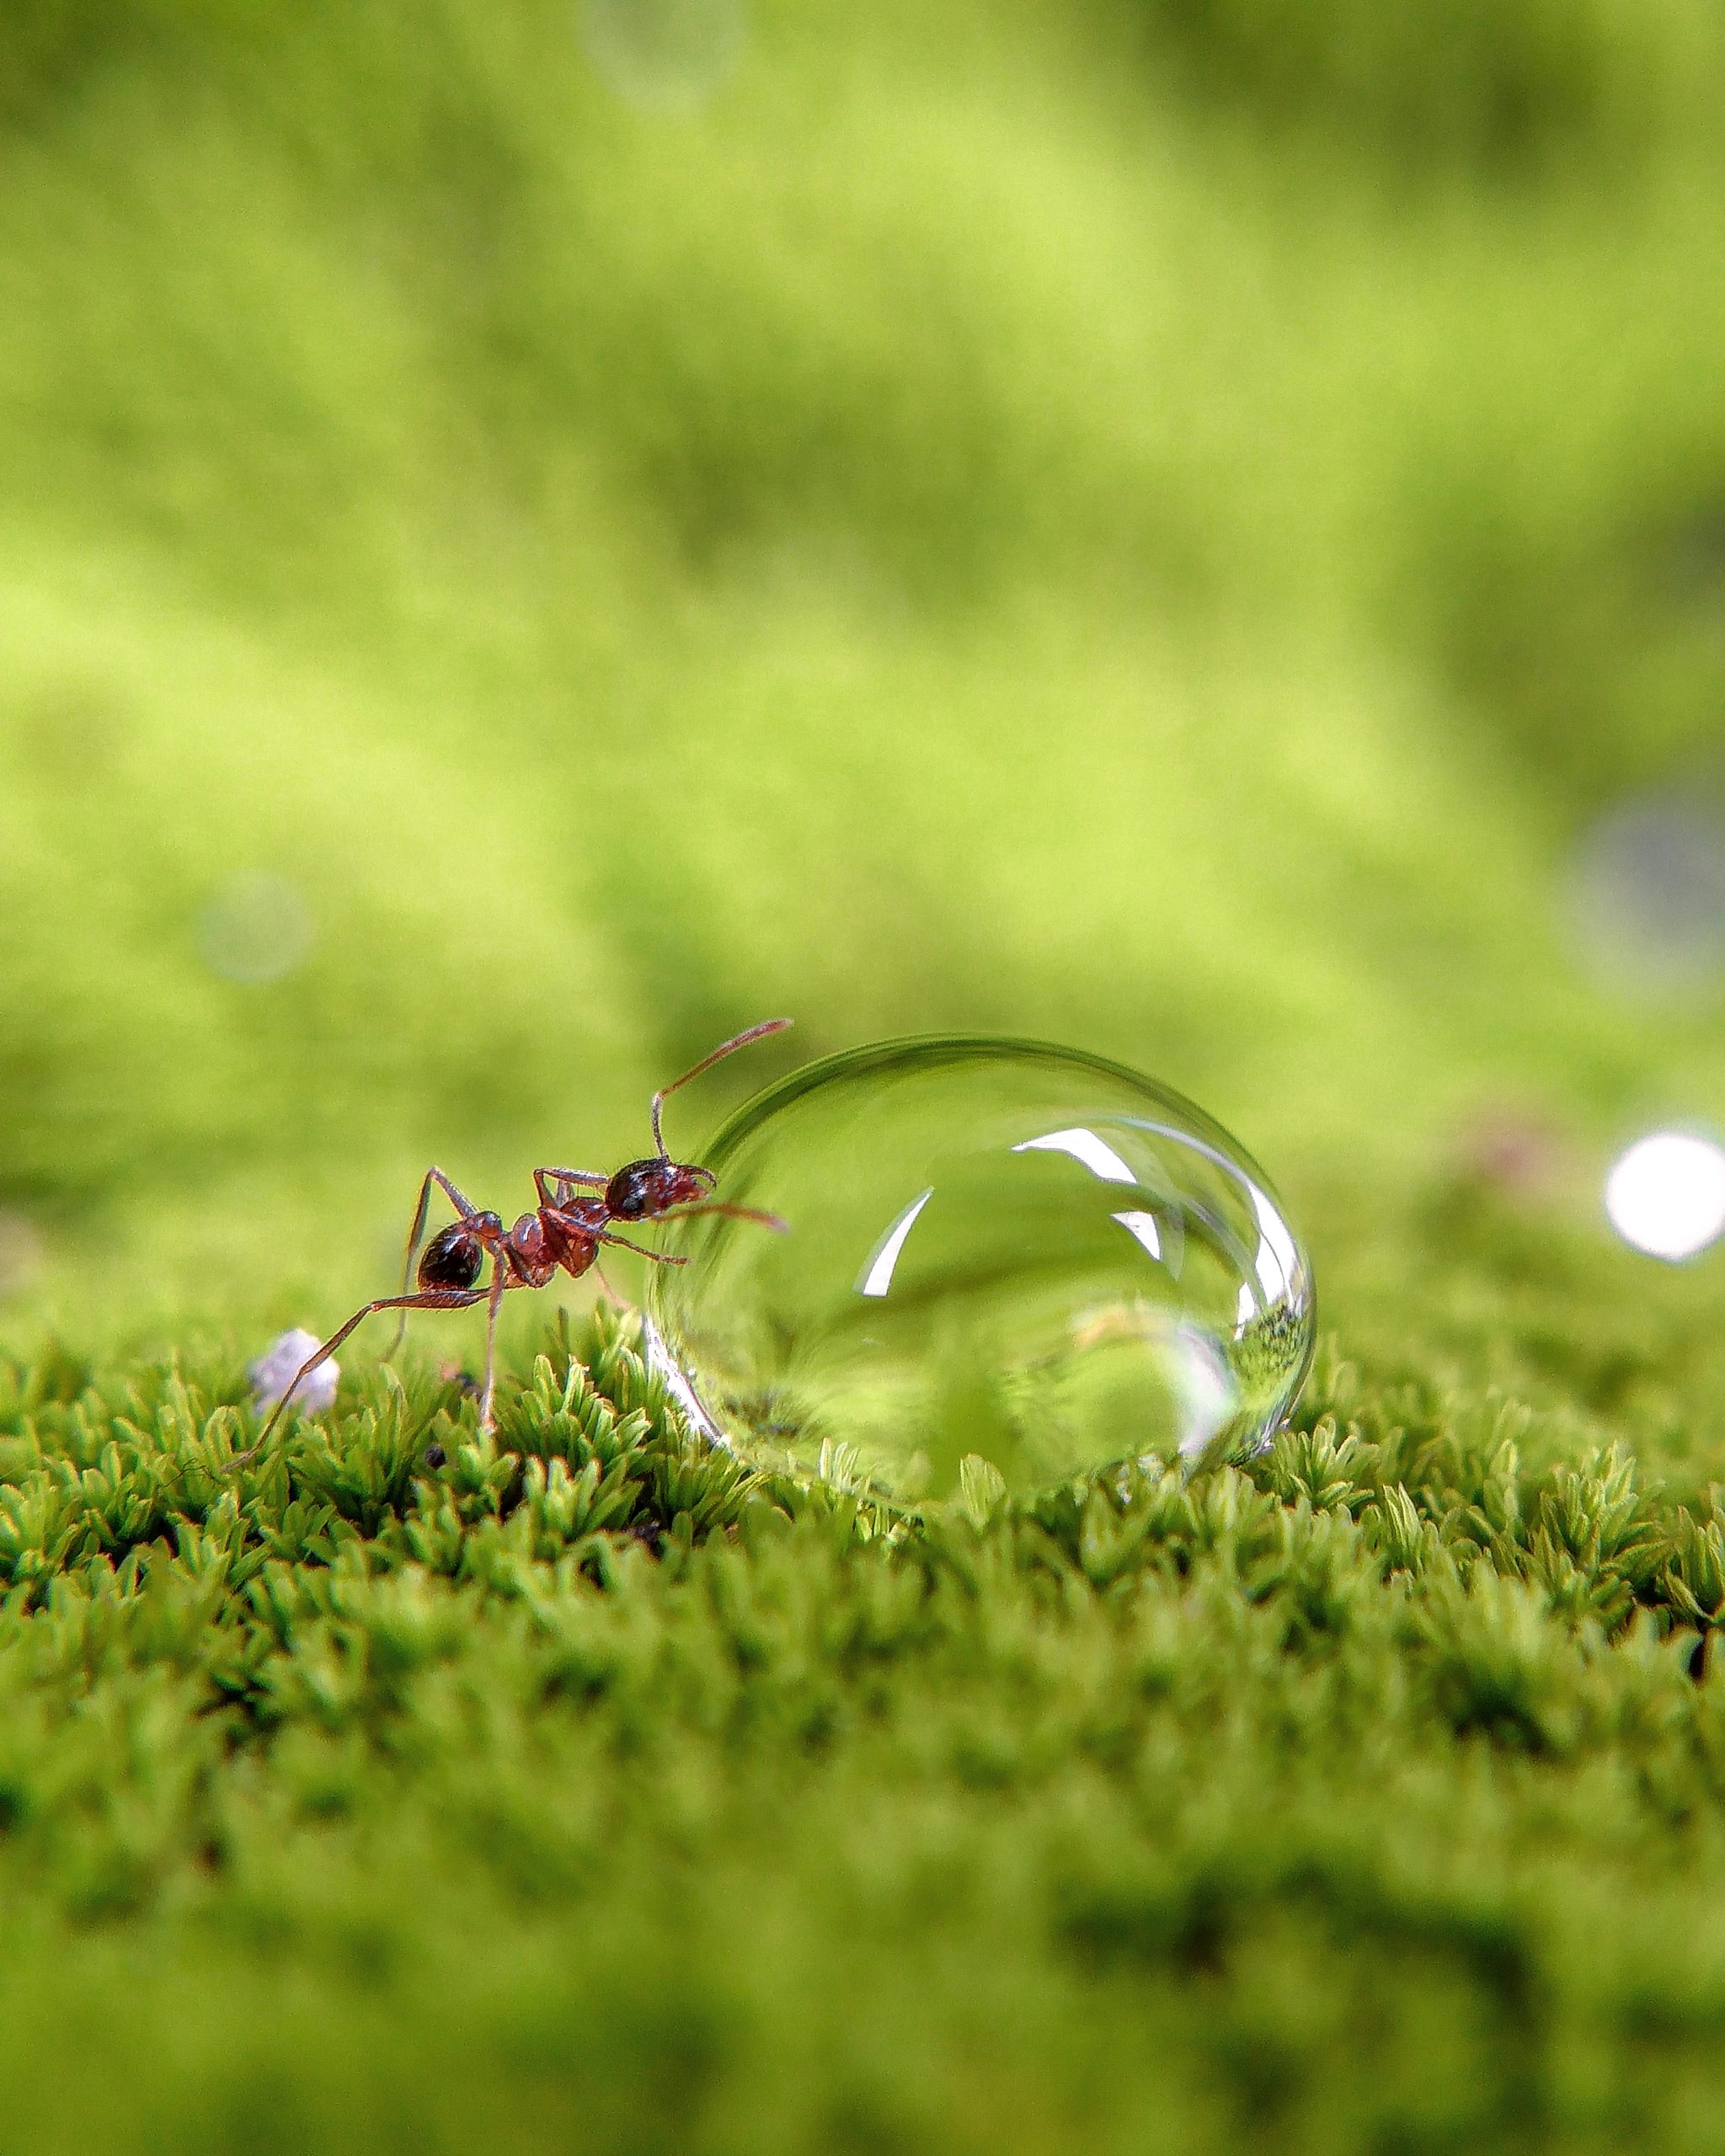 Ant on water drop